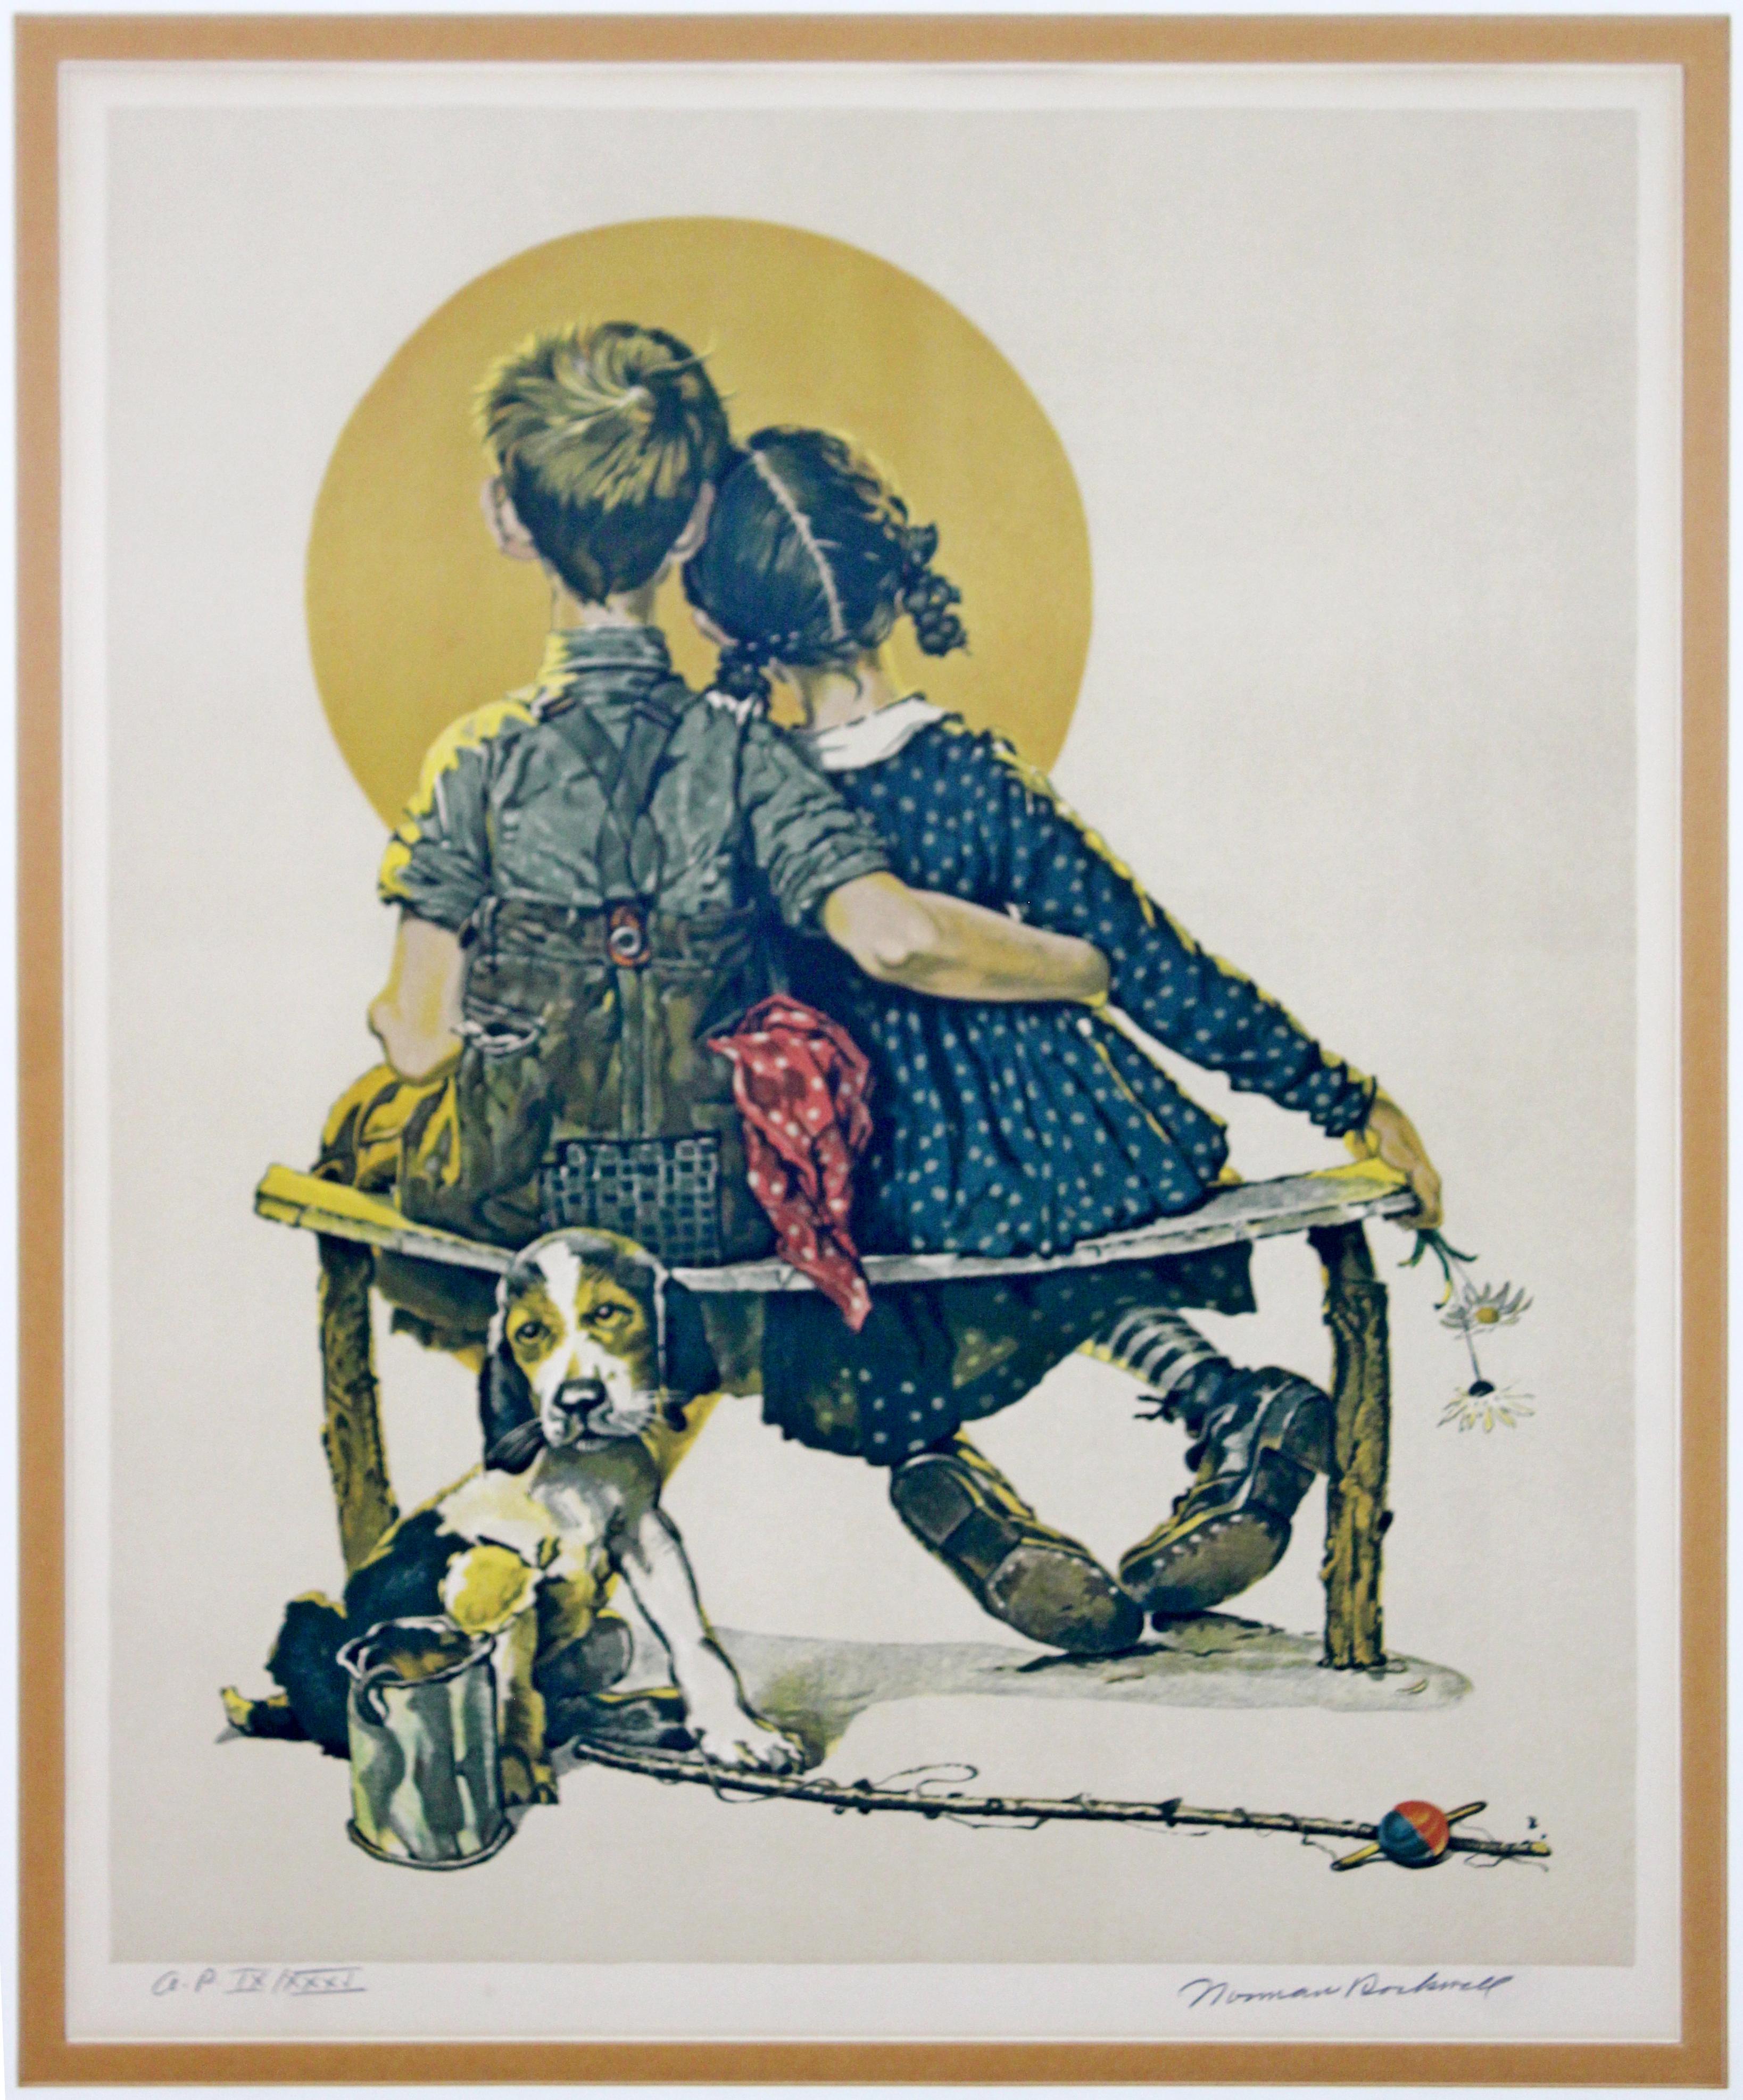 For your consideration is a framed, A.P. Lithograph of Norman Rockwell's 1926 modern illustration 